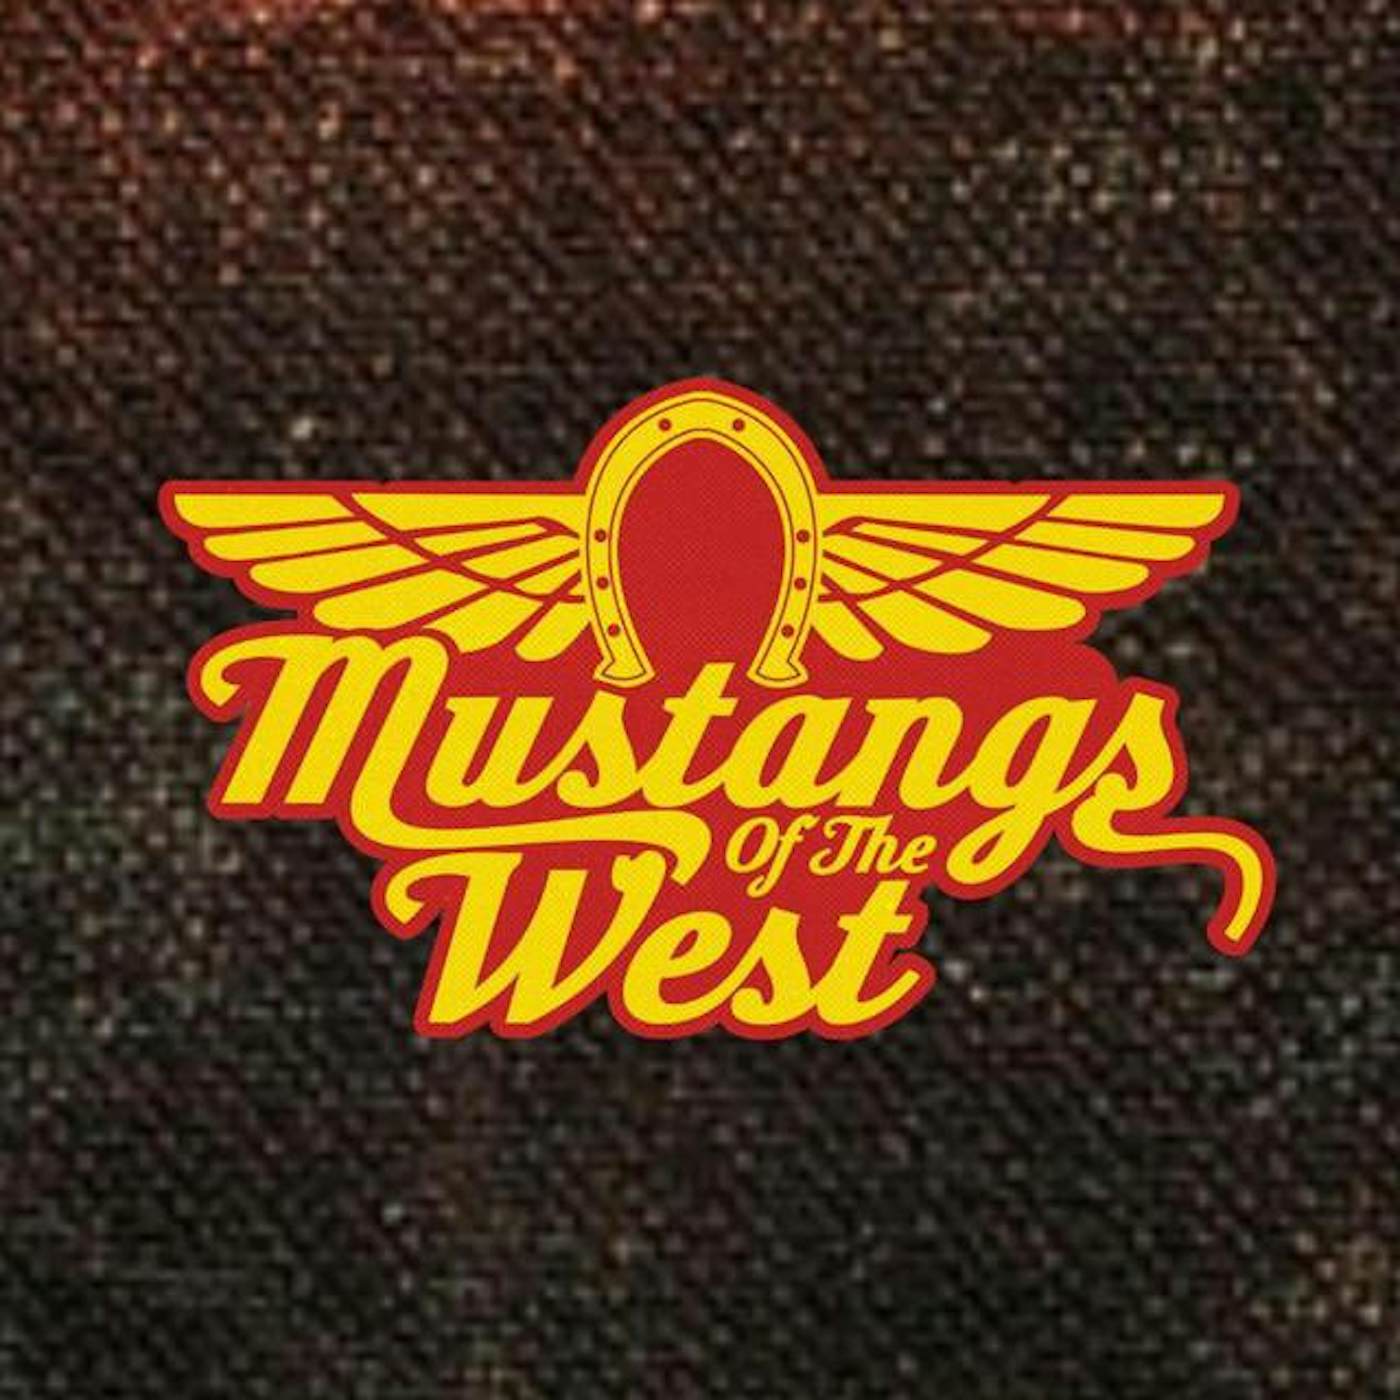 Mustangs of the West